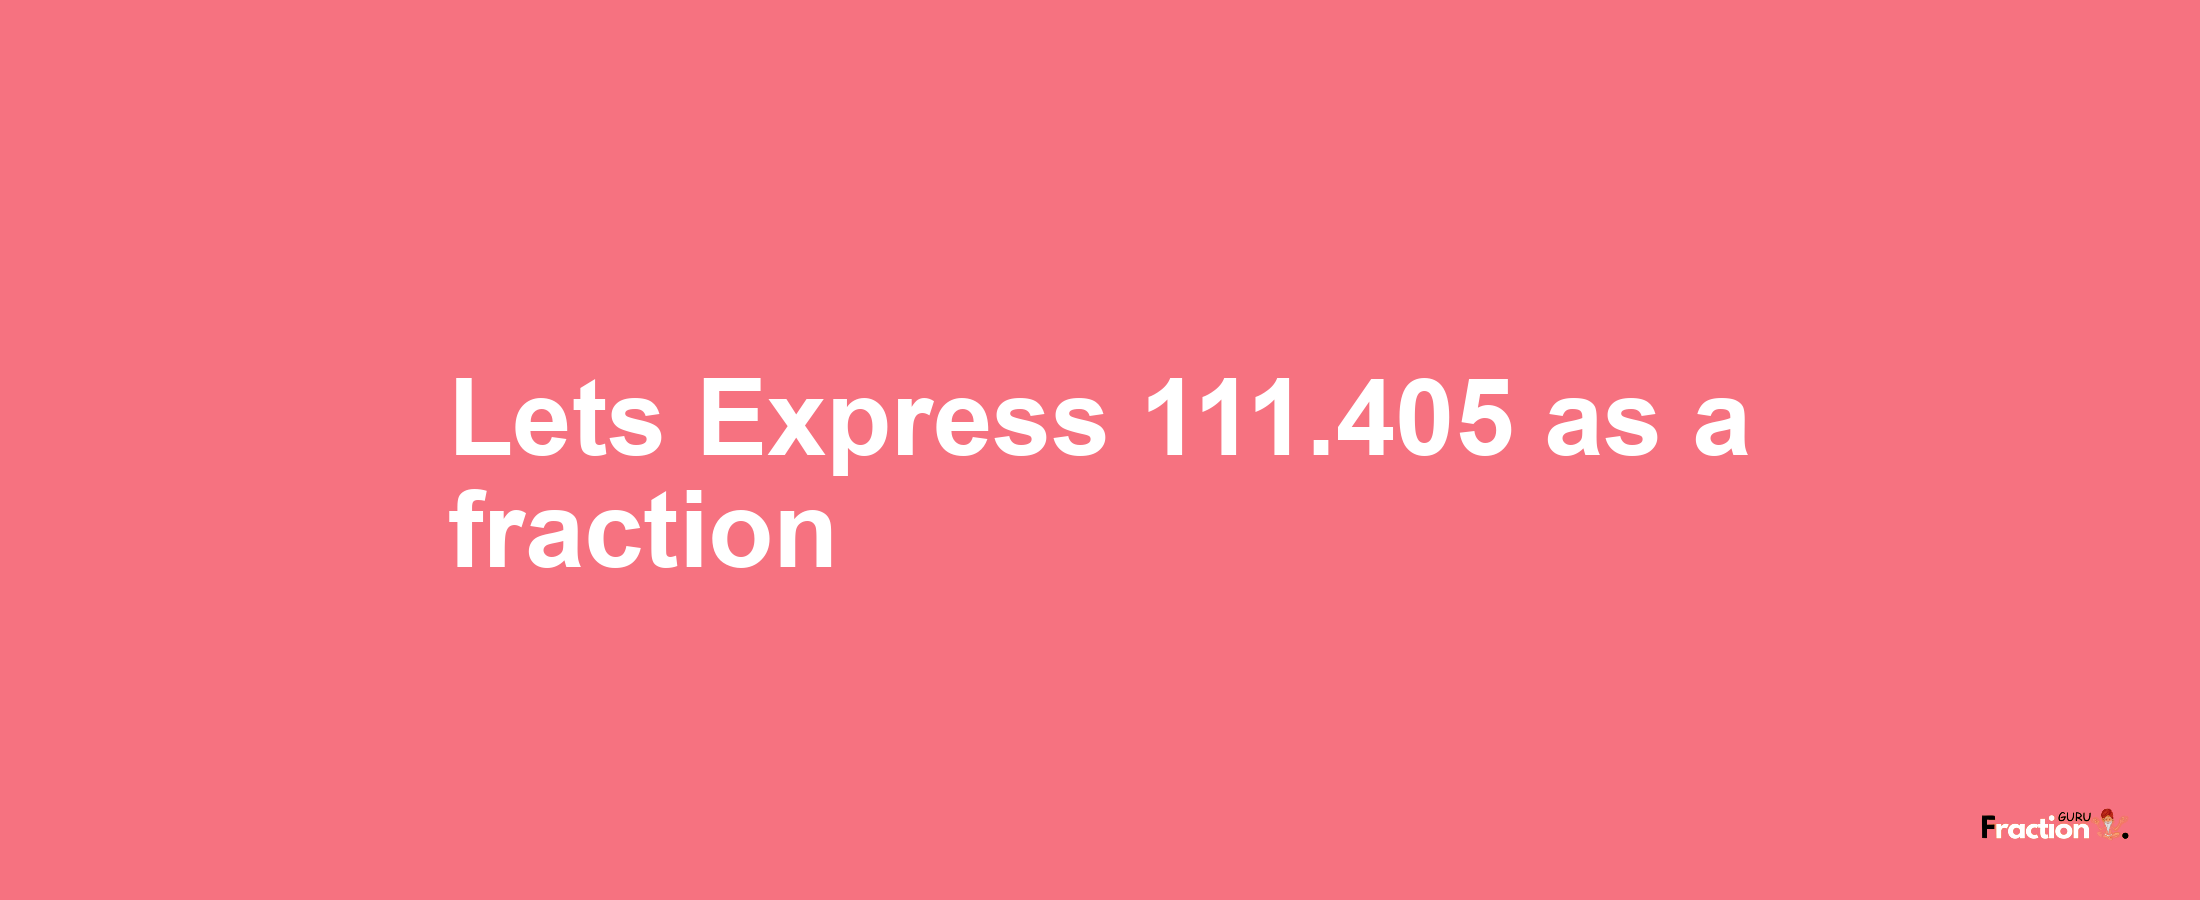 Lets Express 111.405 as afraction